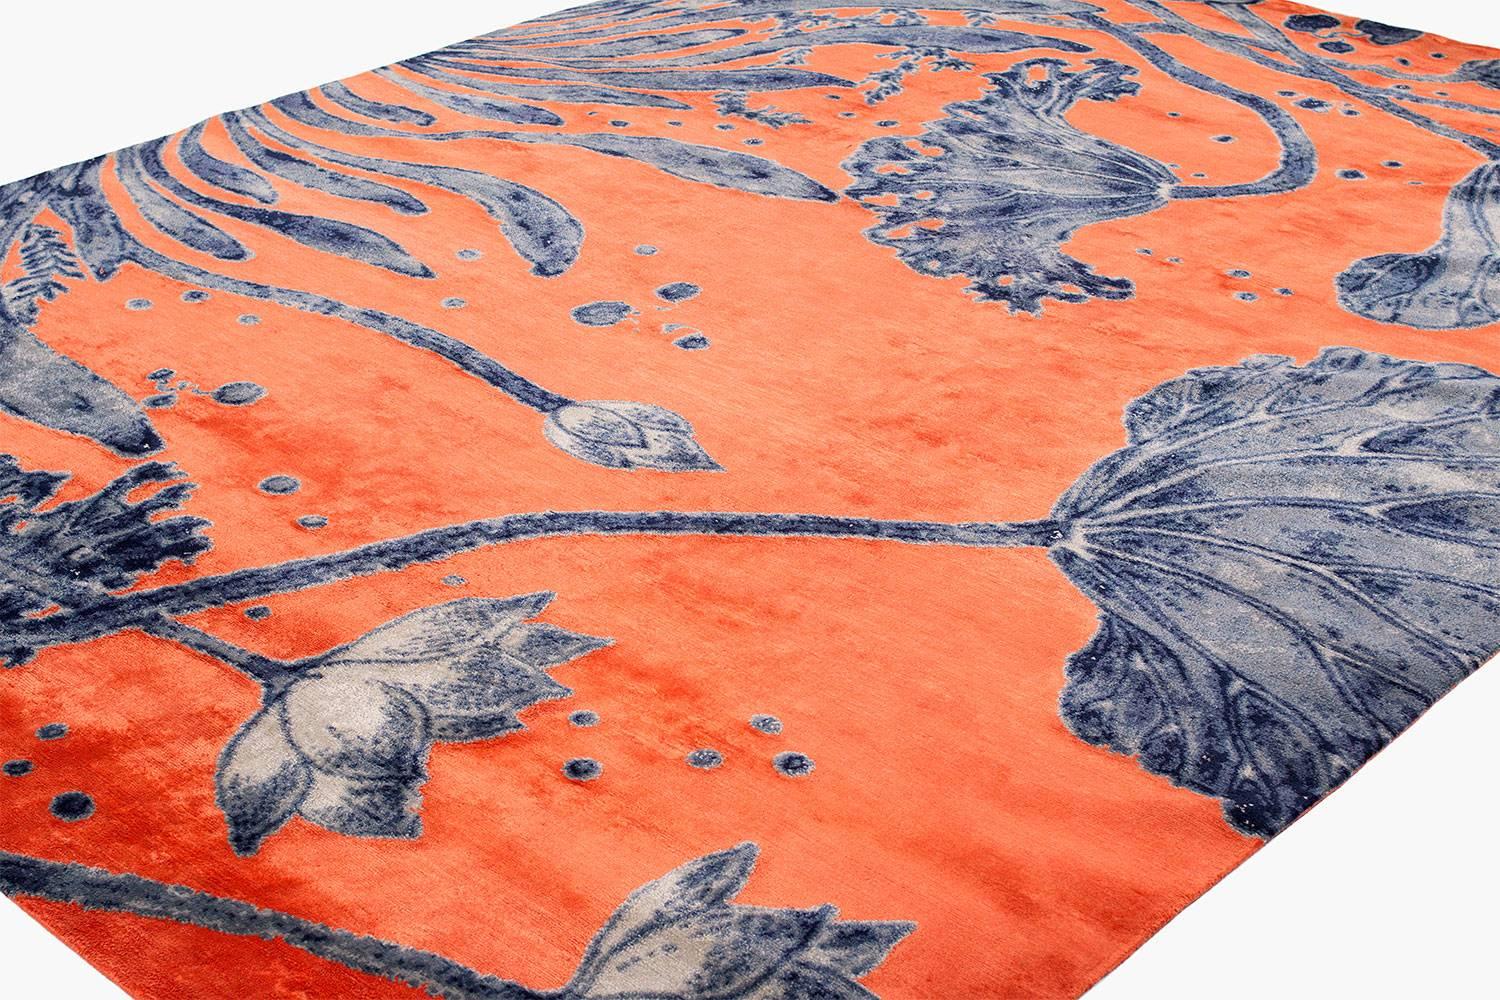 Water flowers is a part of our beauty of Life exhibition in collaboration with the Japanese ceramic artist Yuki Hayama. Water flowers is one of four carpet designs made especially for this collection, each piece handwoven by skilled artisans in